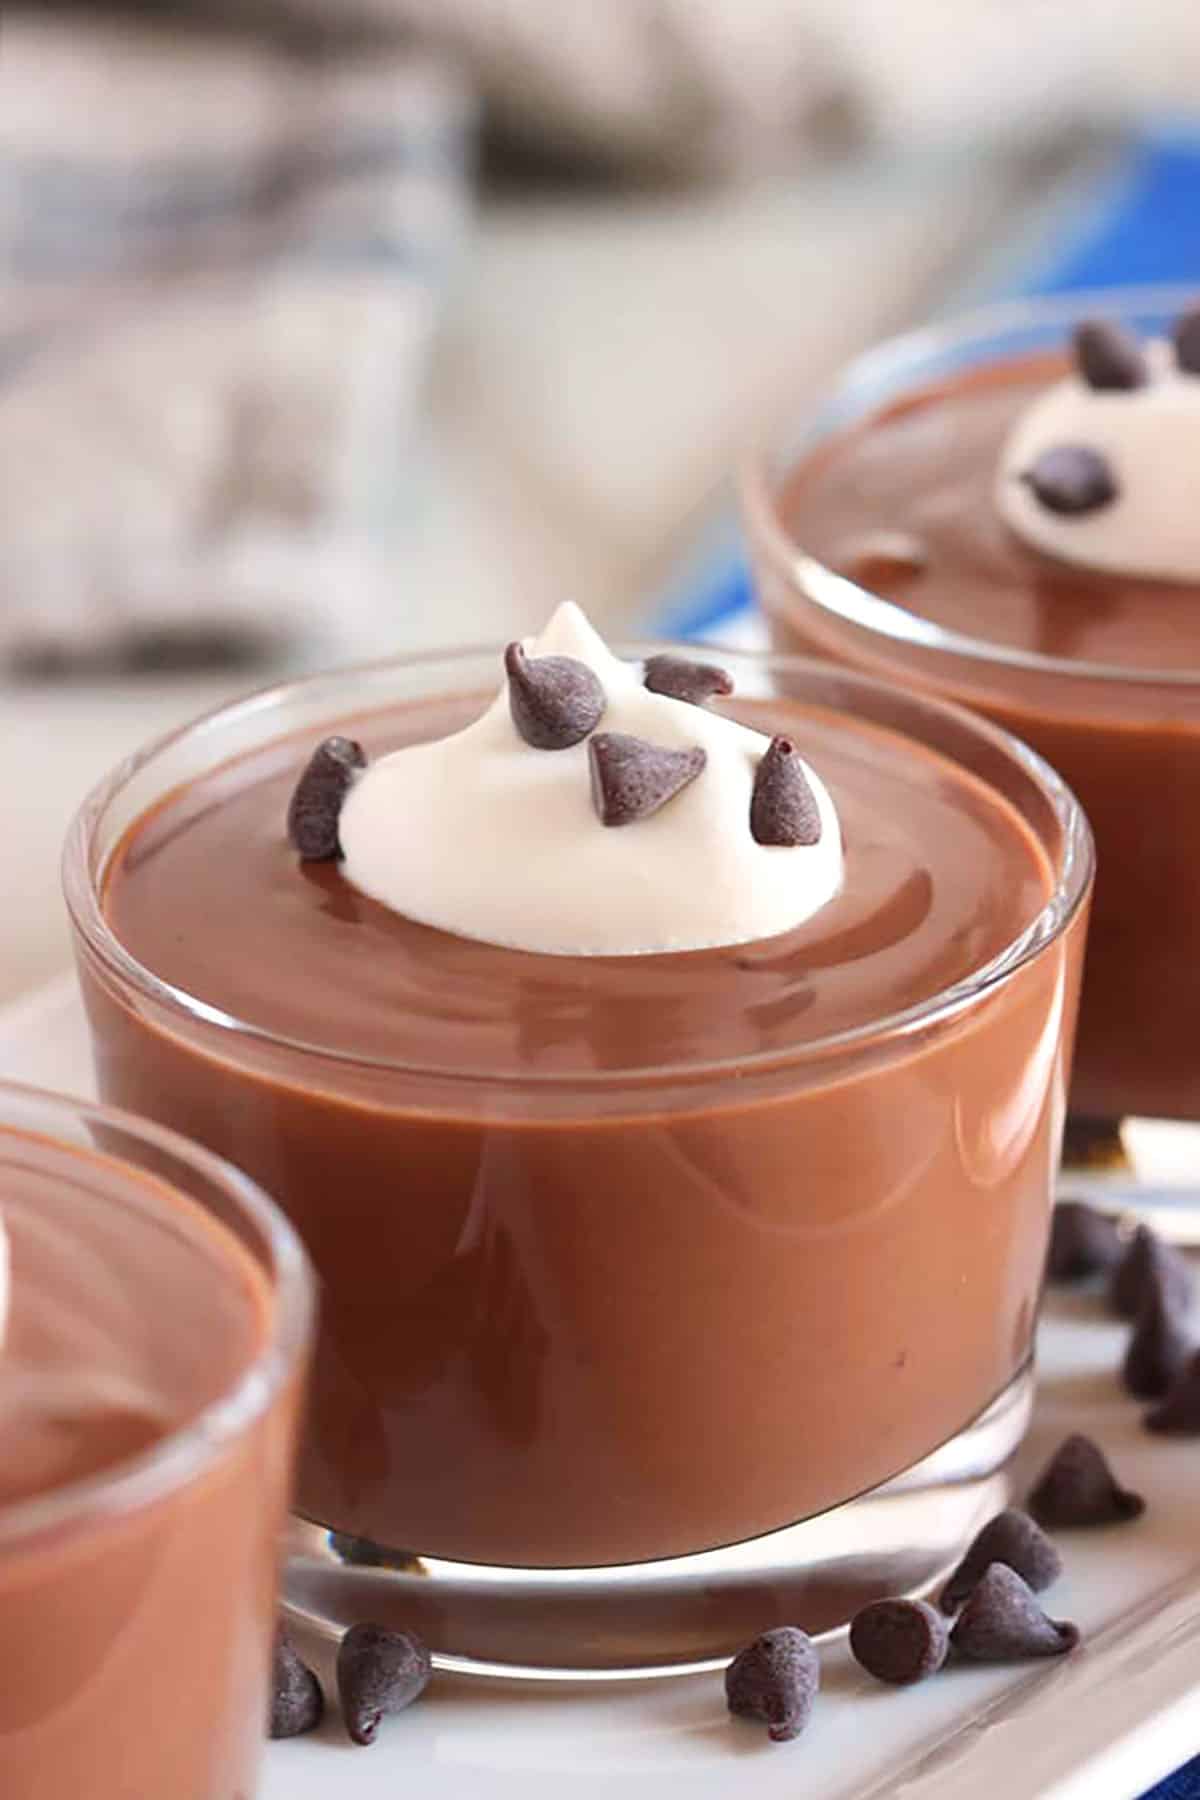 Chocolate pudding in a glass dish with a bit of whipped cream on top.